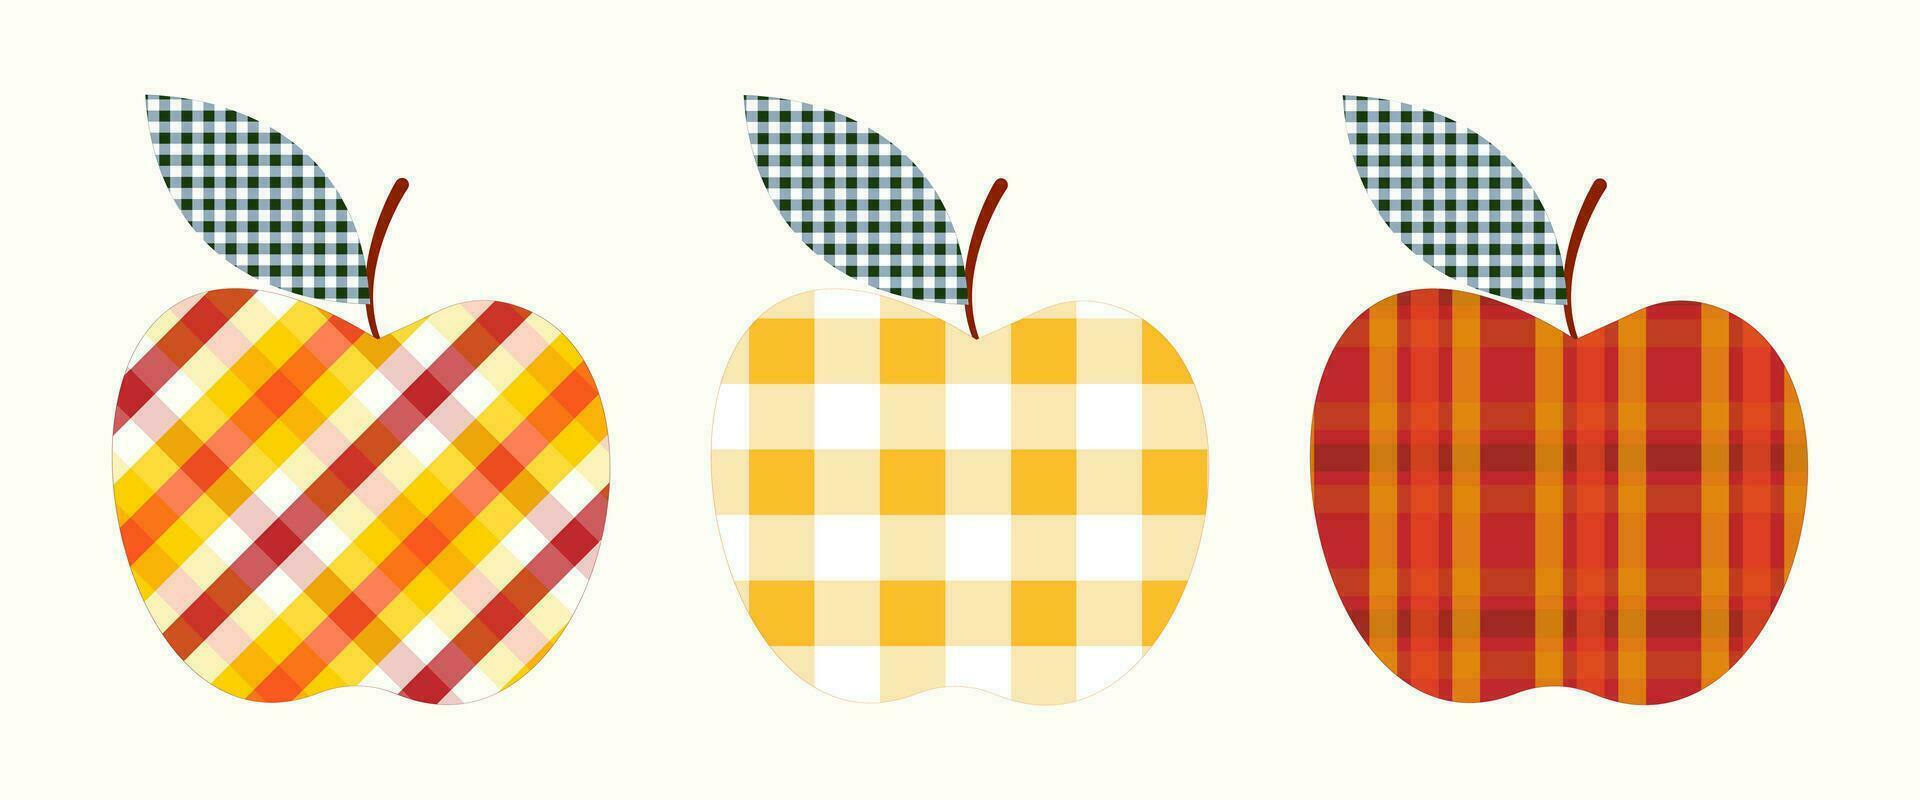 Clip art set of apples in tartan texture, on isolated background. Hand drawn background for Autumn harvest holiday, Thanksgiving, Halloween, seasonal, textile, scrapbooking. vector